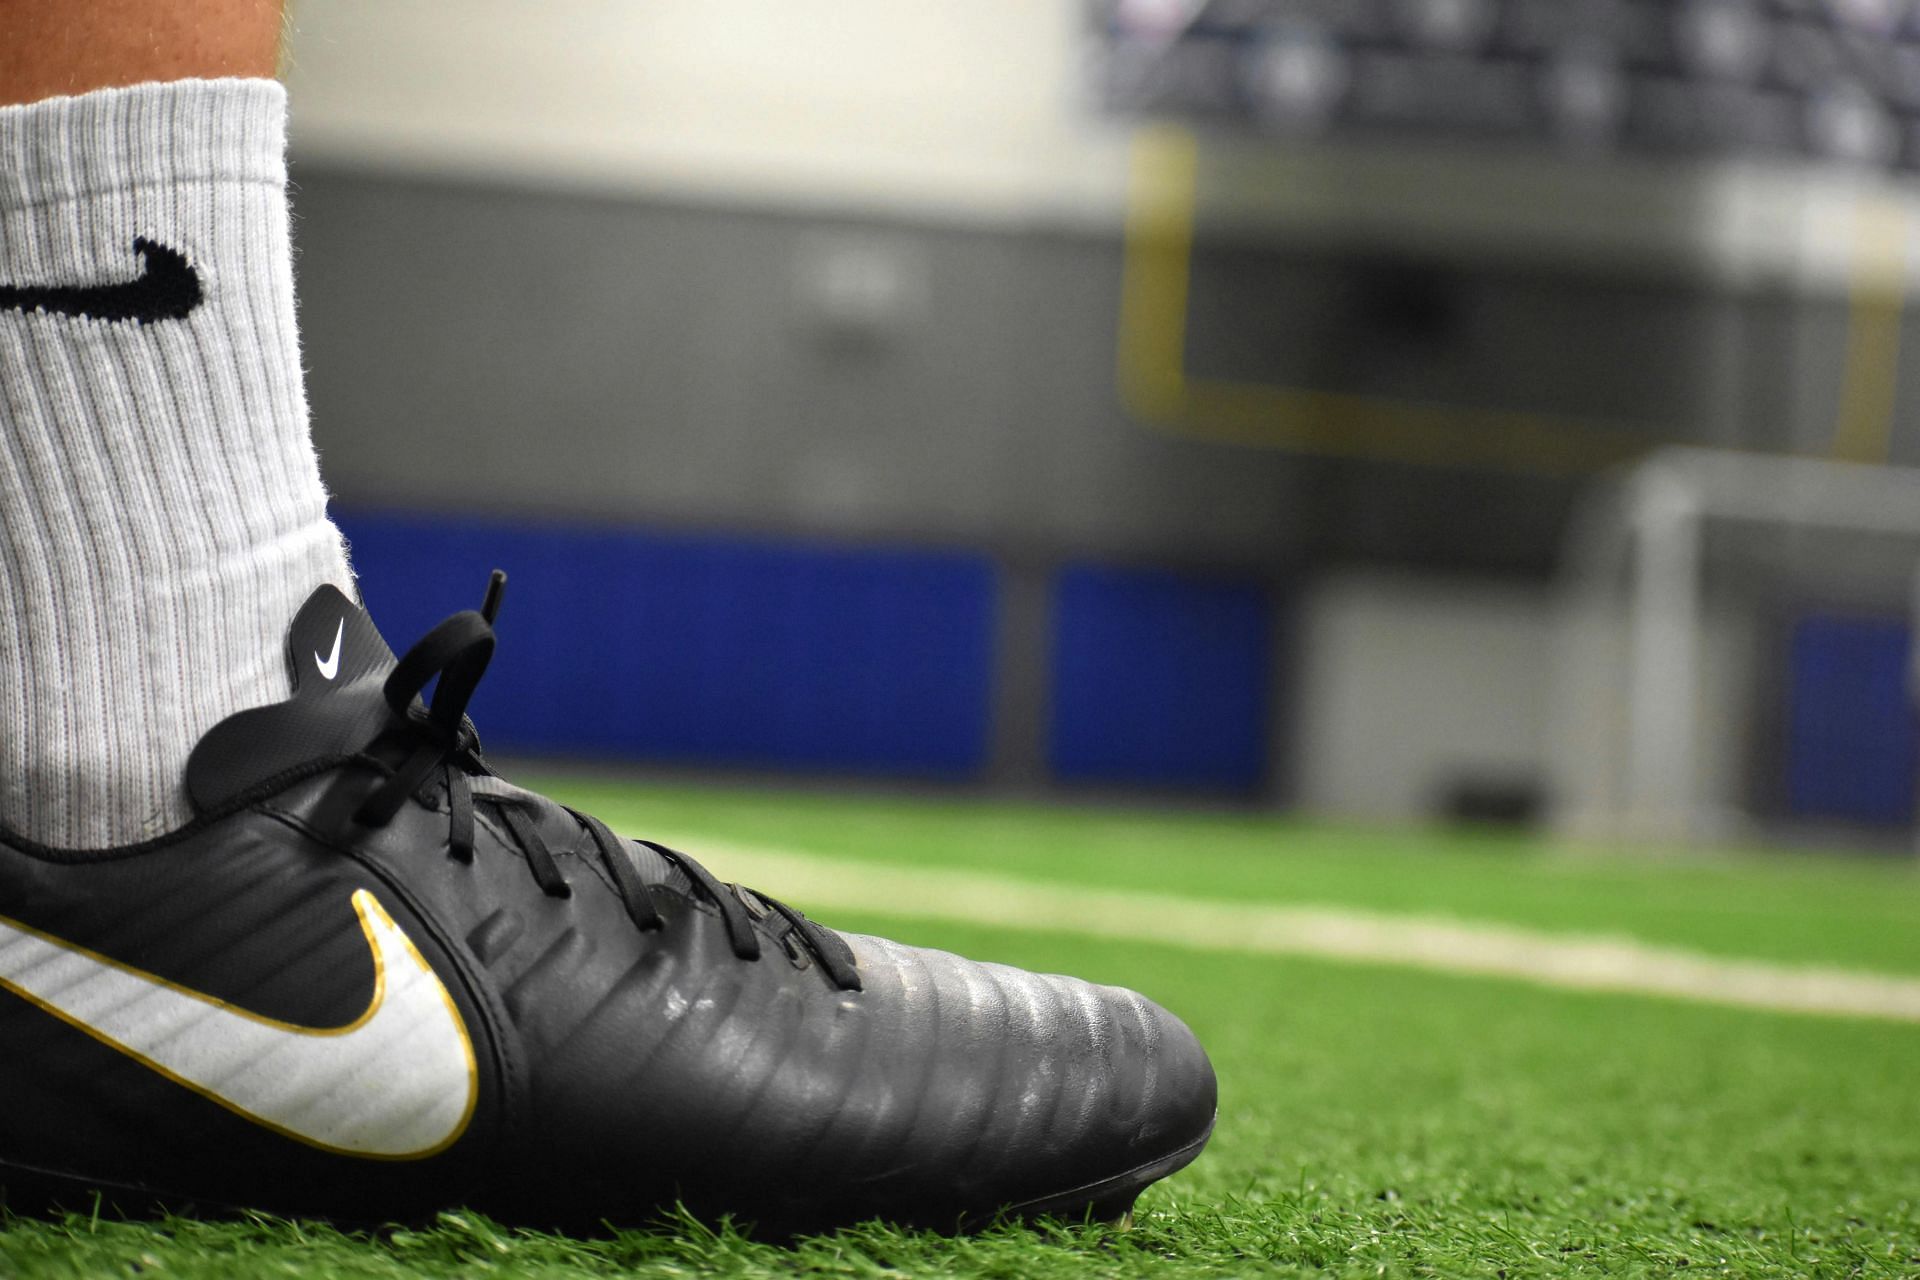 Steps to clean soccer cleats (Image via Pexels/@ Kevin McCartney)